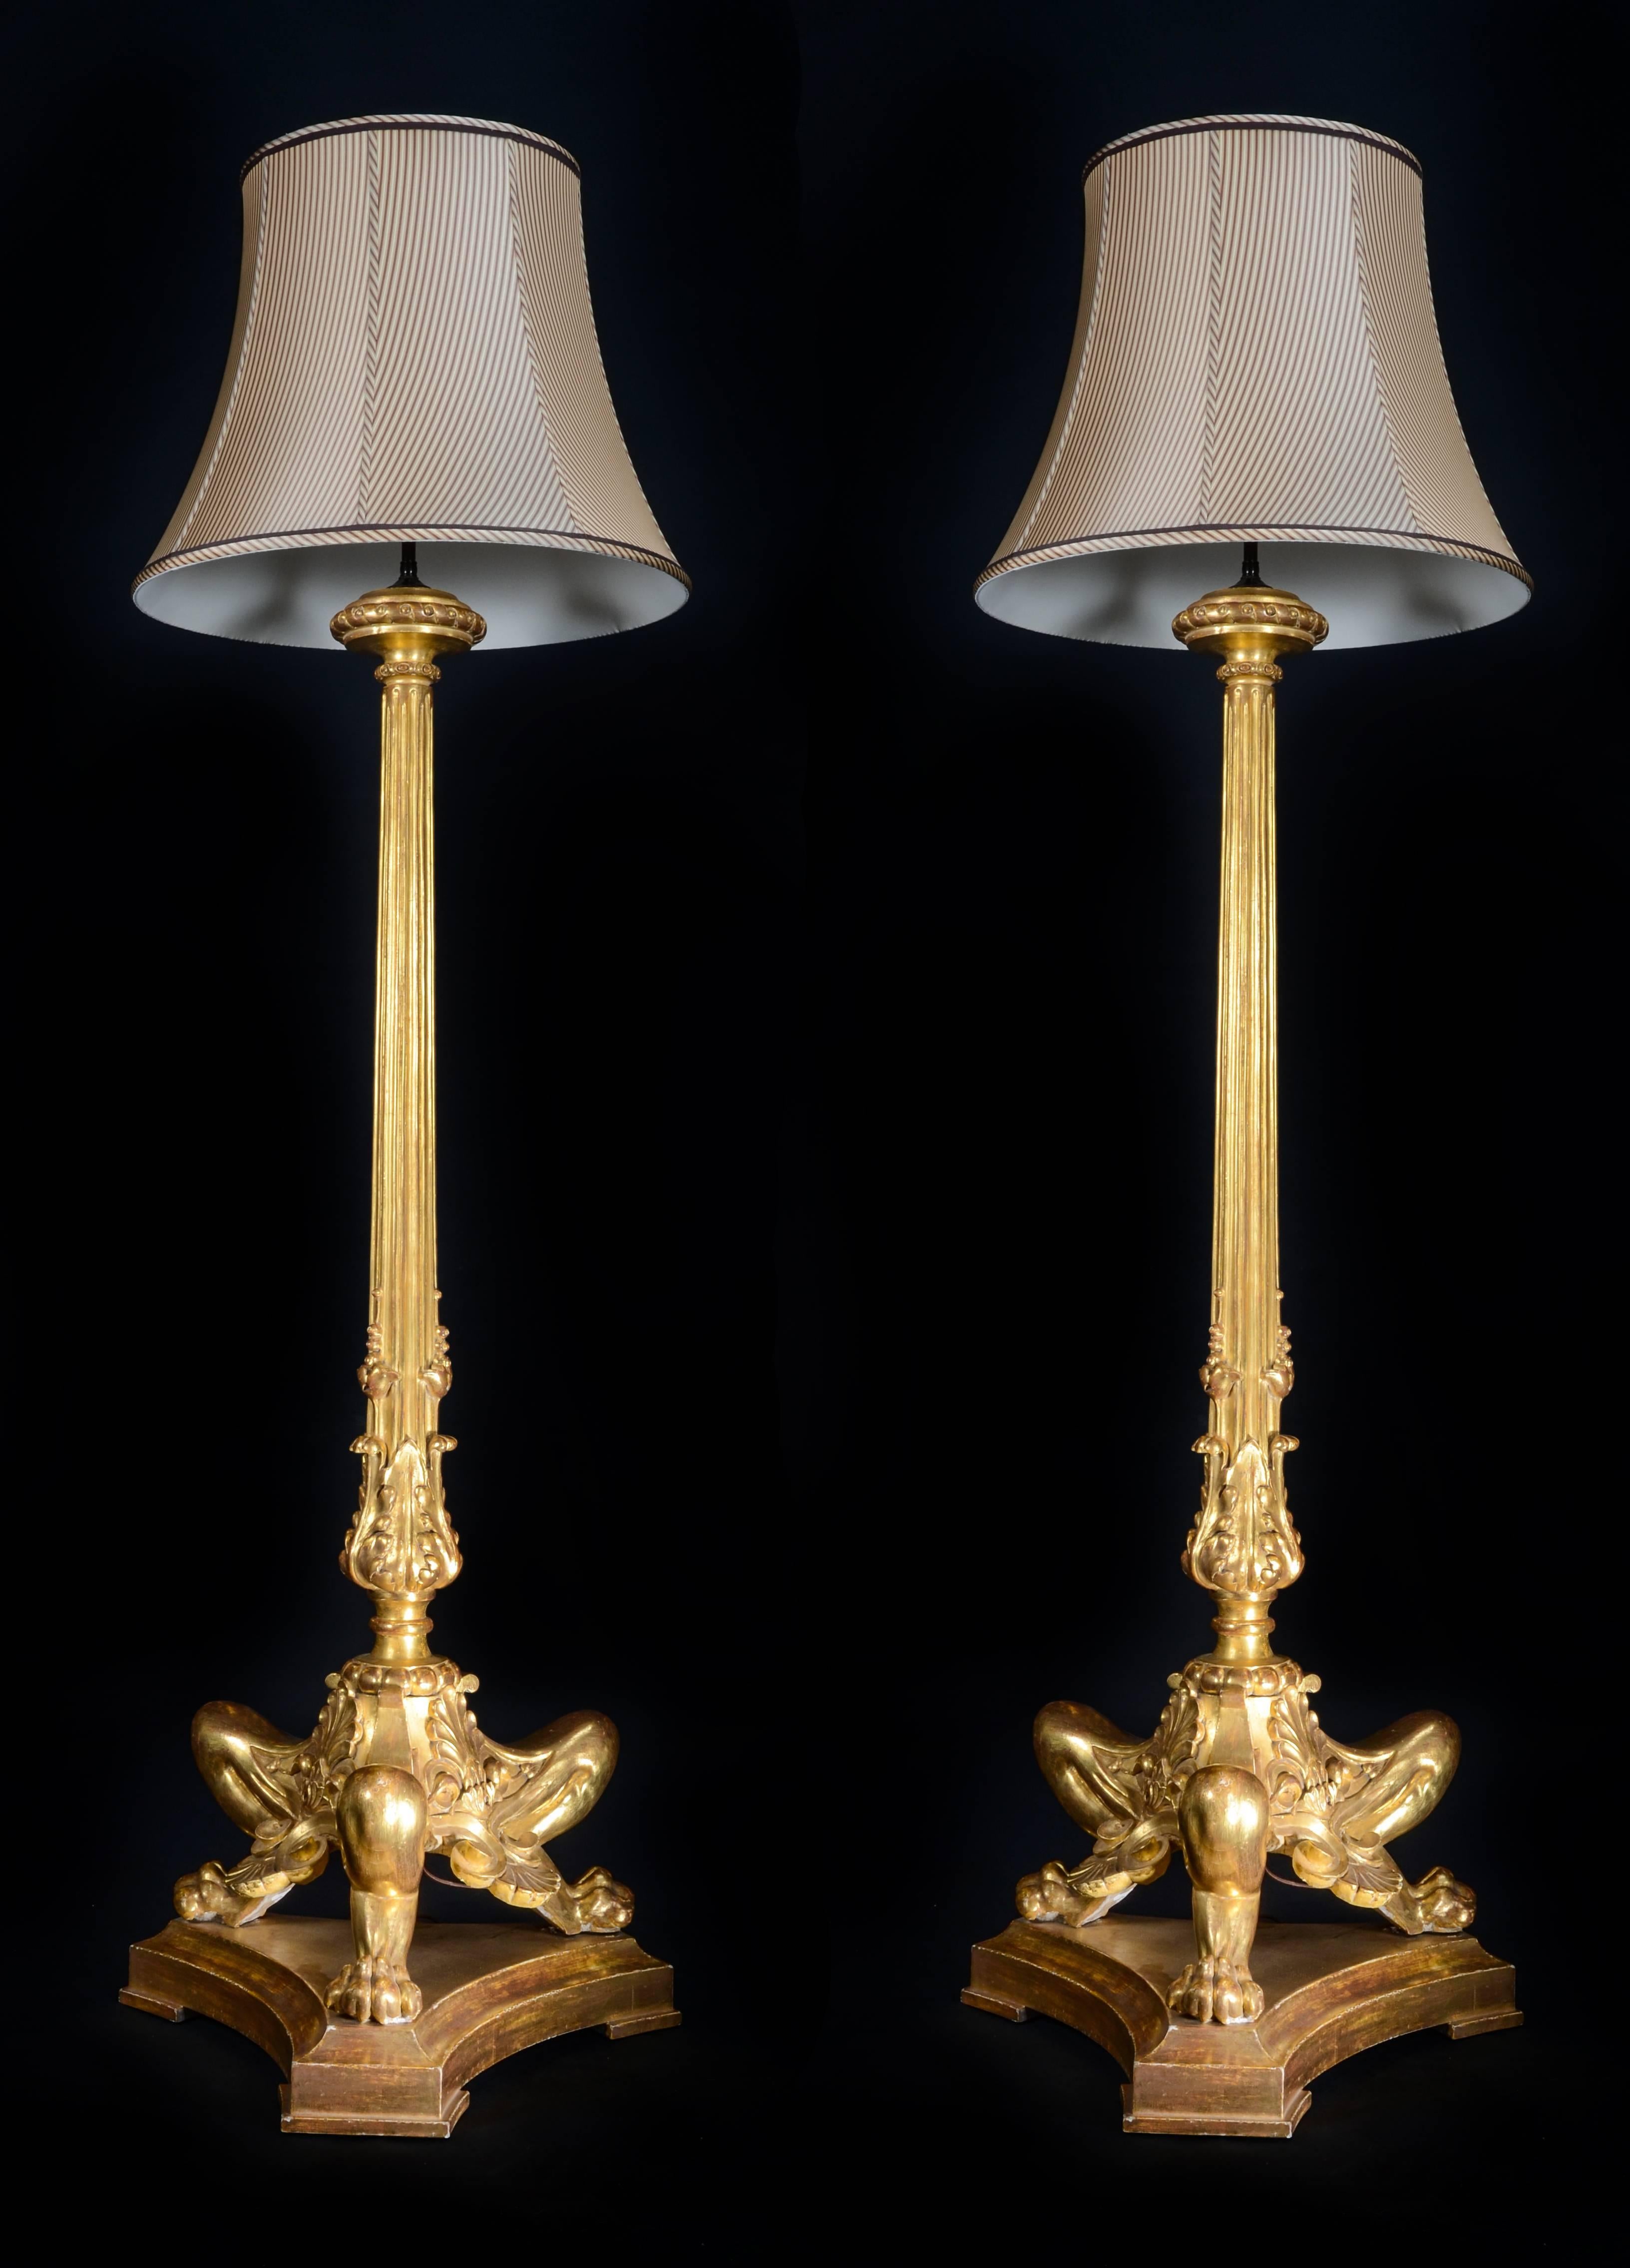 A pair of fine antique French neoclassical style carved giltwood floor lamps.